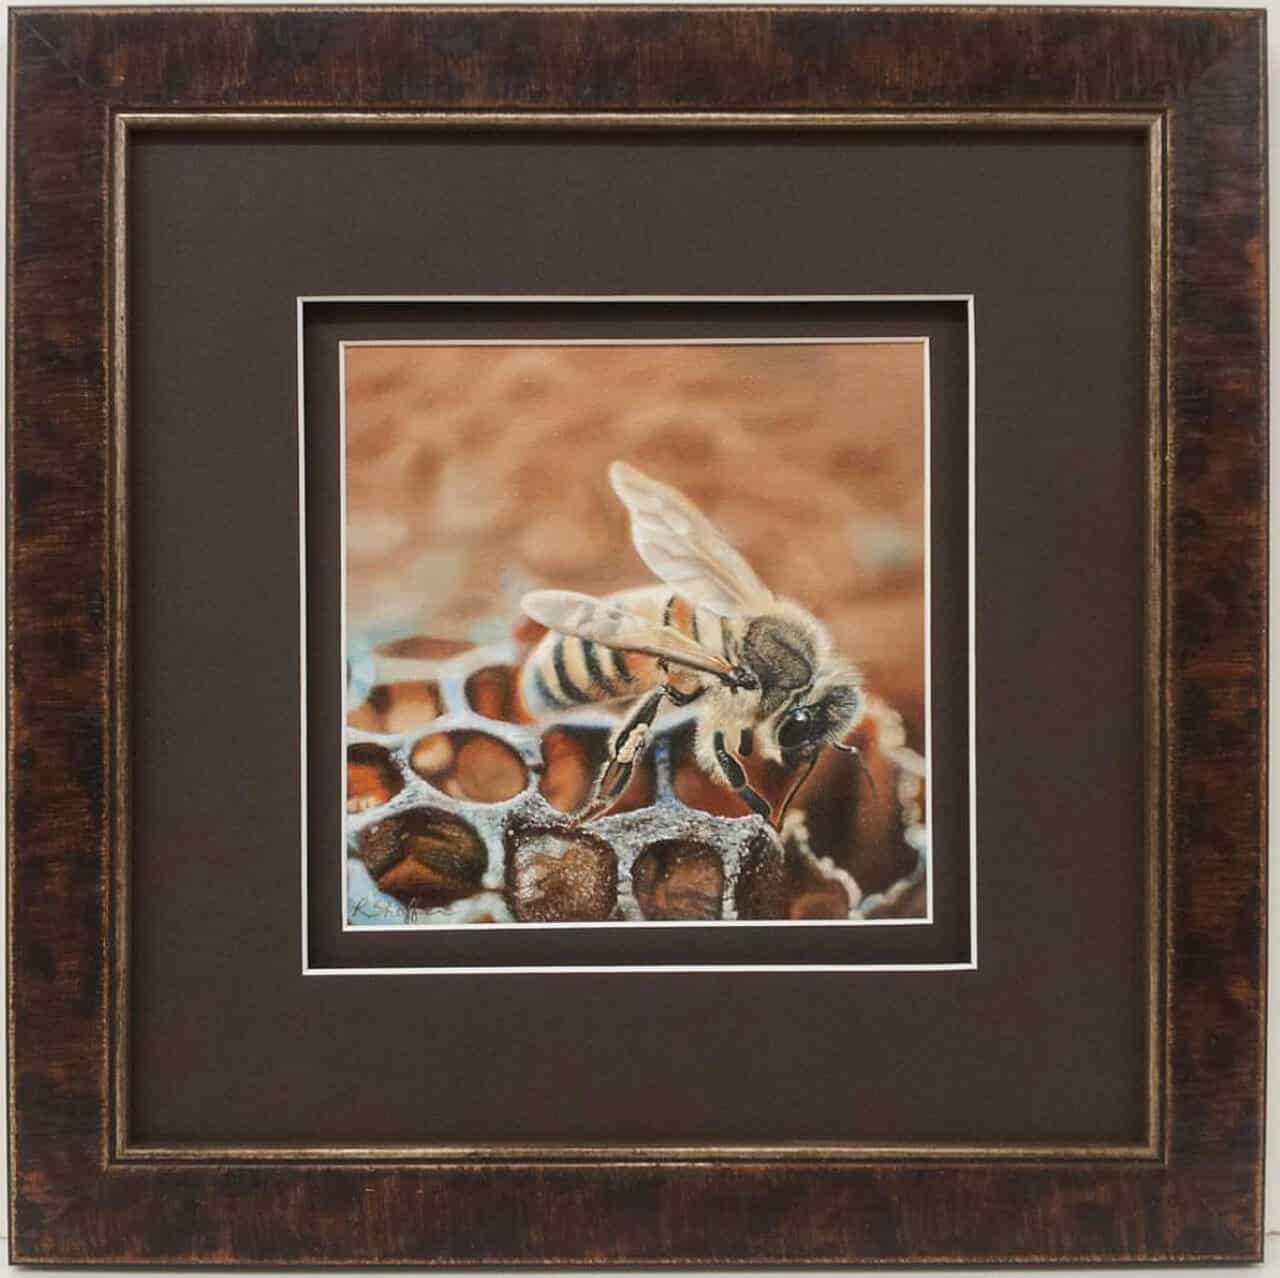 A framed painting of a bee on a honeycomb.